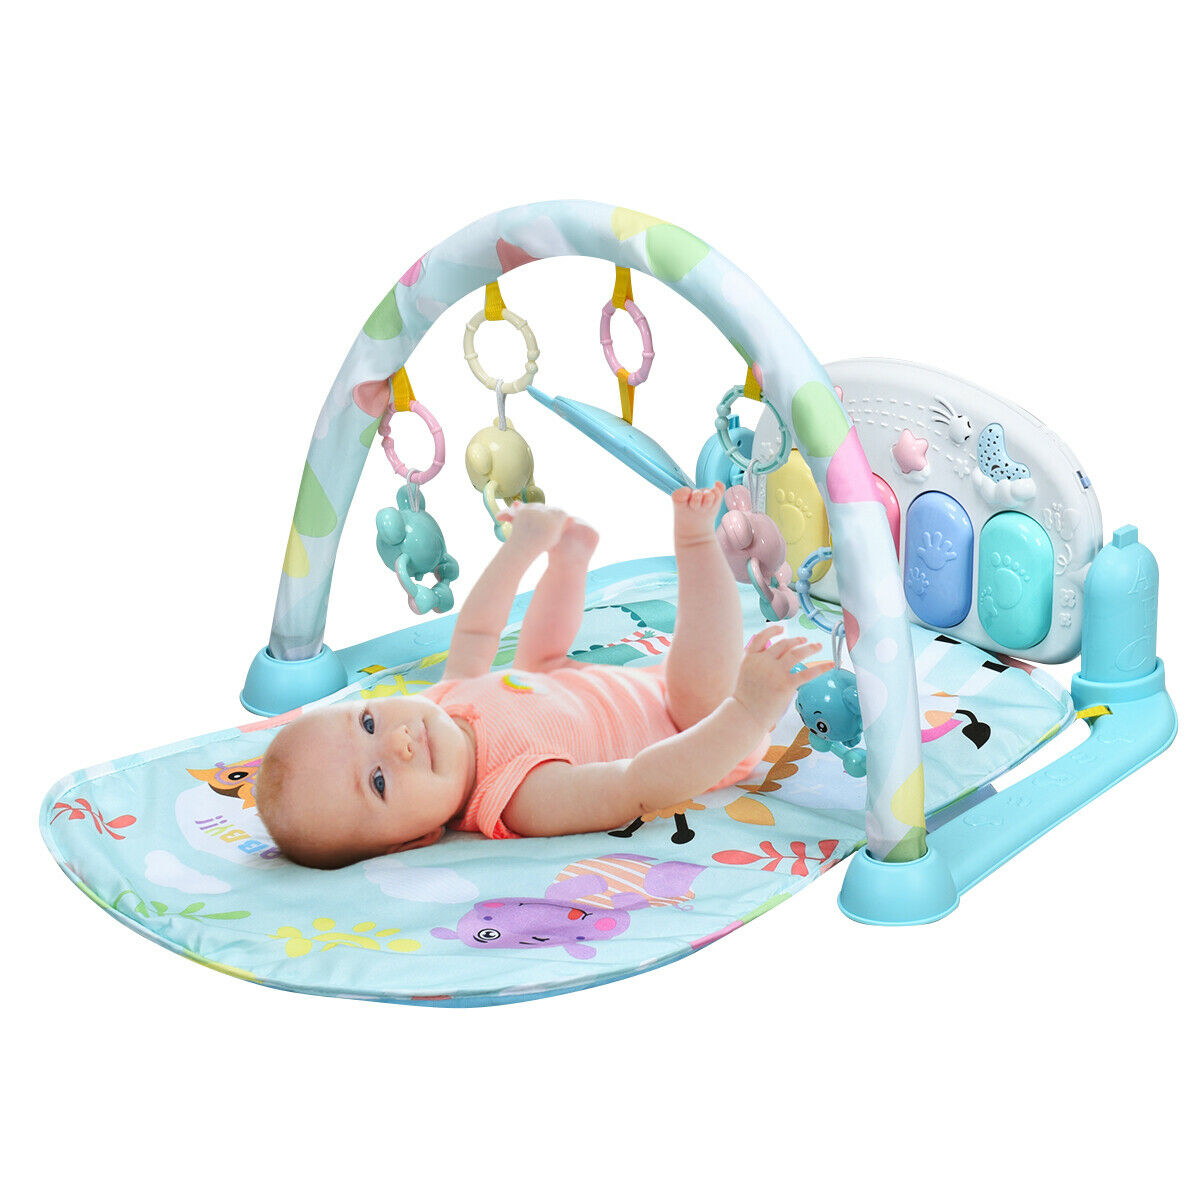 Baby Gym Play Mat 3 In 1 Fitness Music And Lights Fun Piano Activity Center Pink Blue - Pink